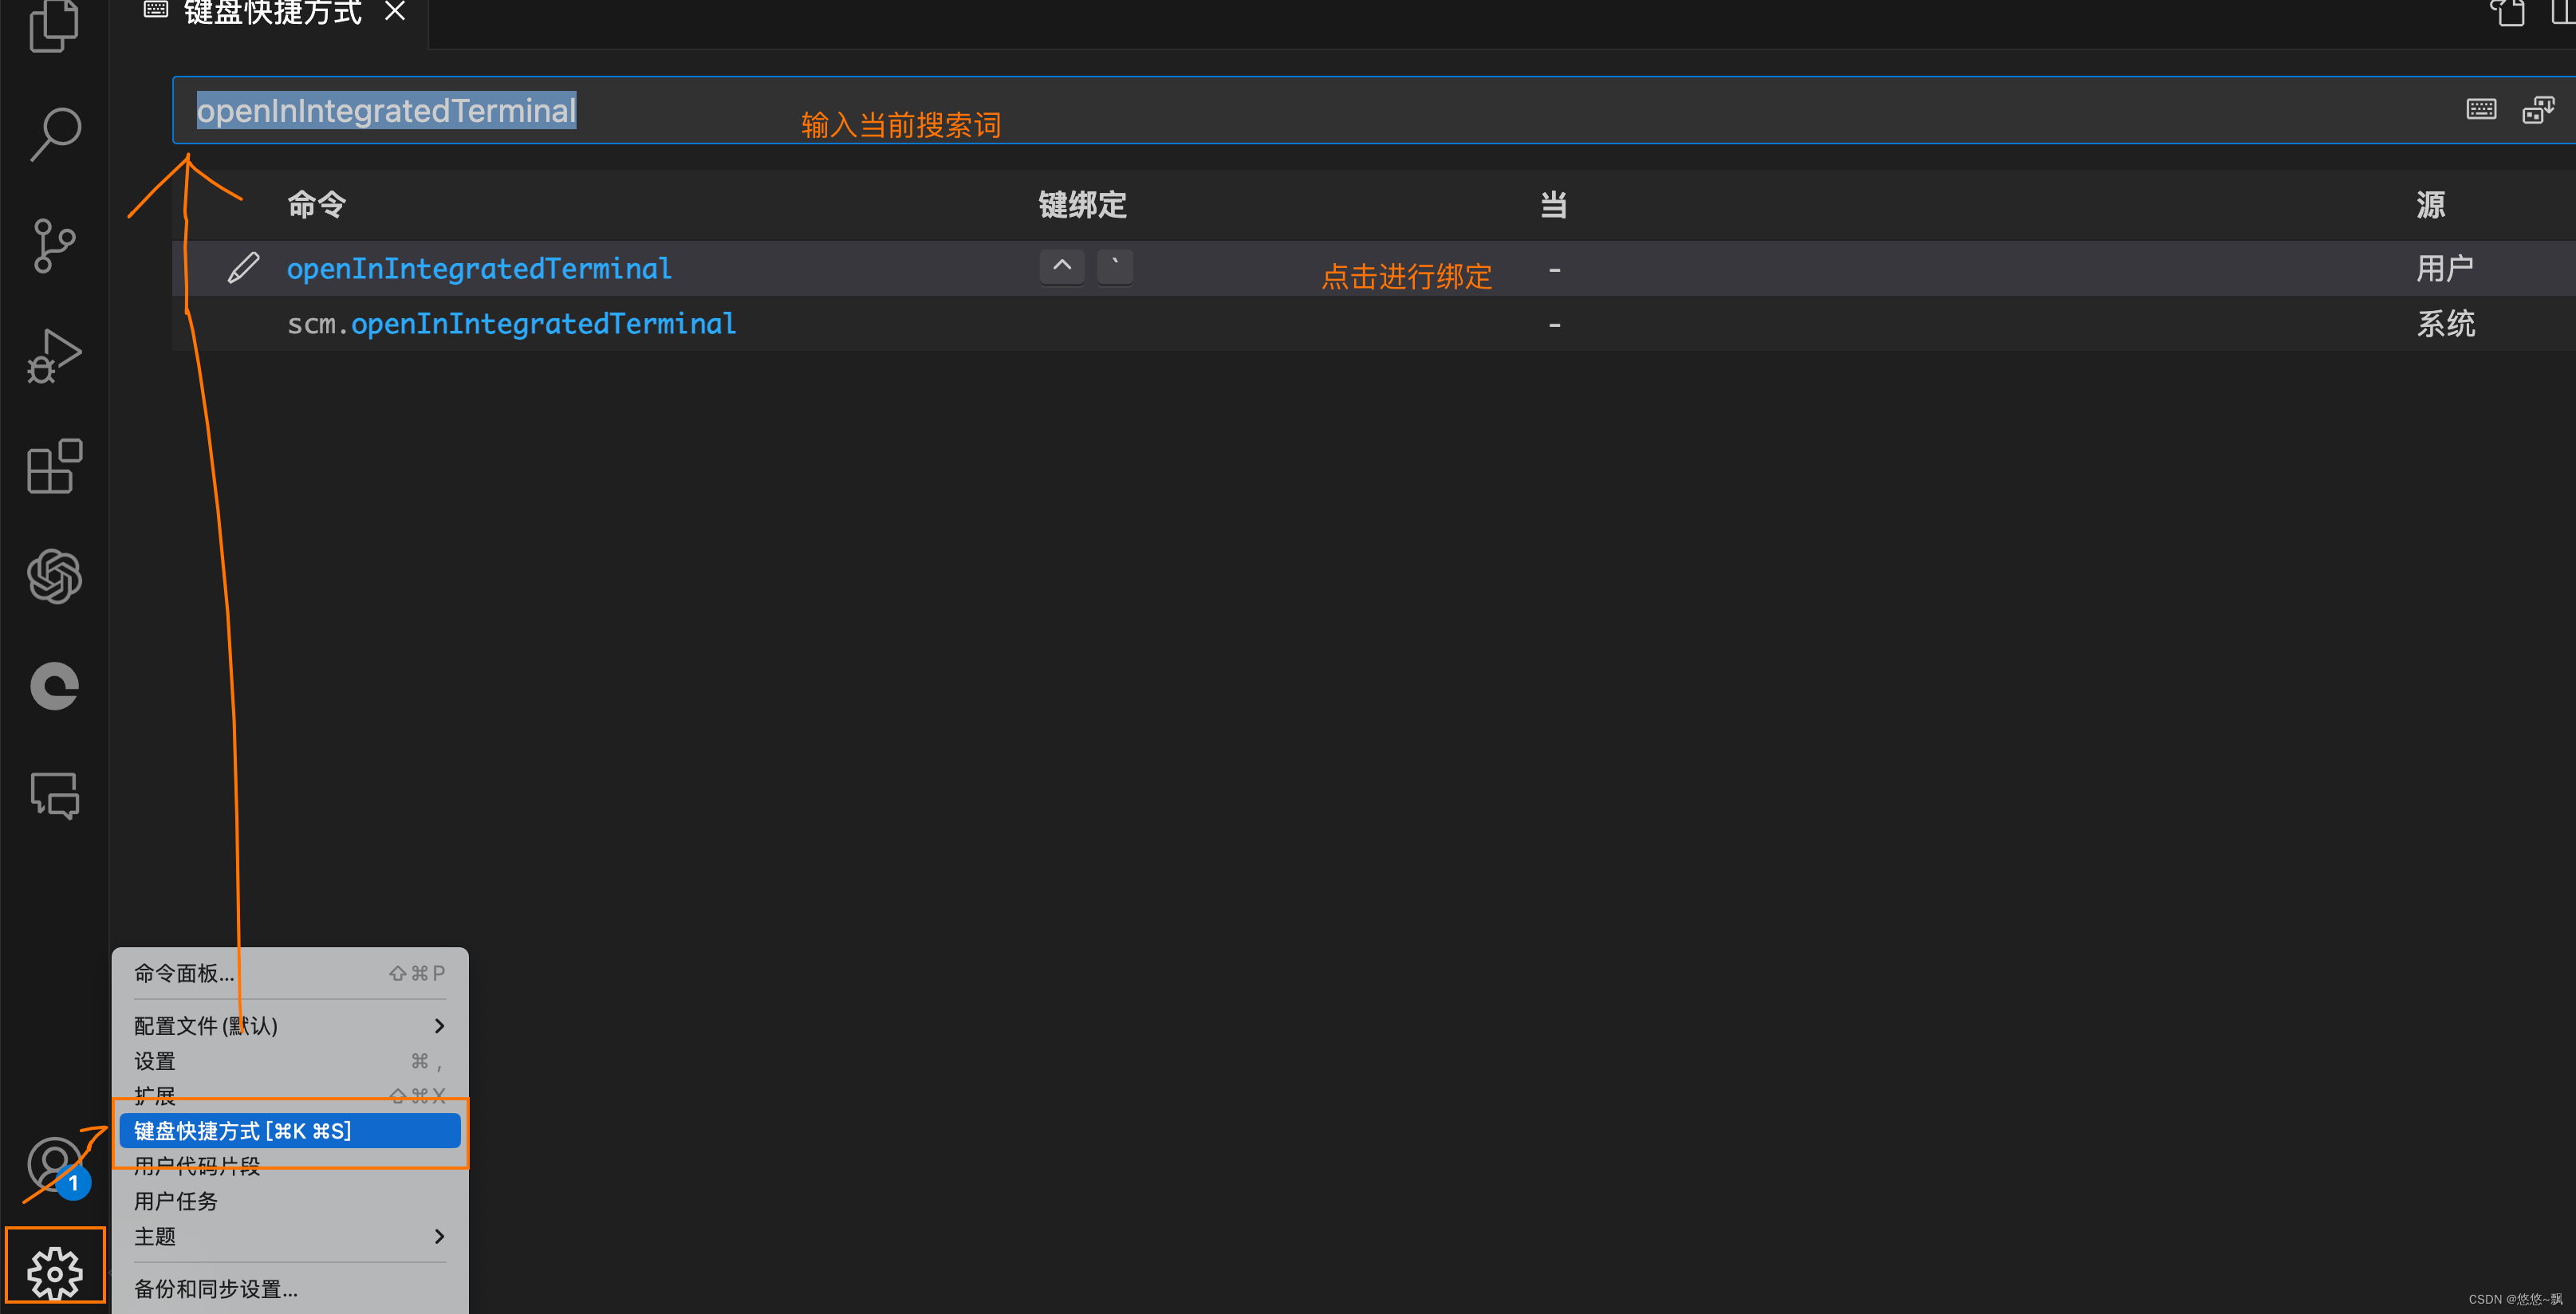 VScode 集成<span style='color:red;'>终端</span>设置默认<span style='color:red;'>打开</span><span style='color:red;'>当前</span>文件夹 <span style='color:red;'>mac</span>系统